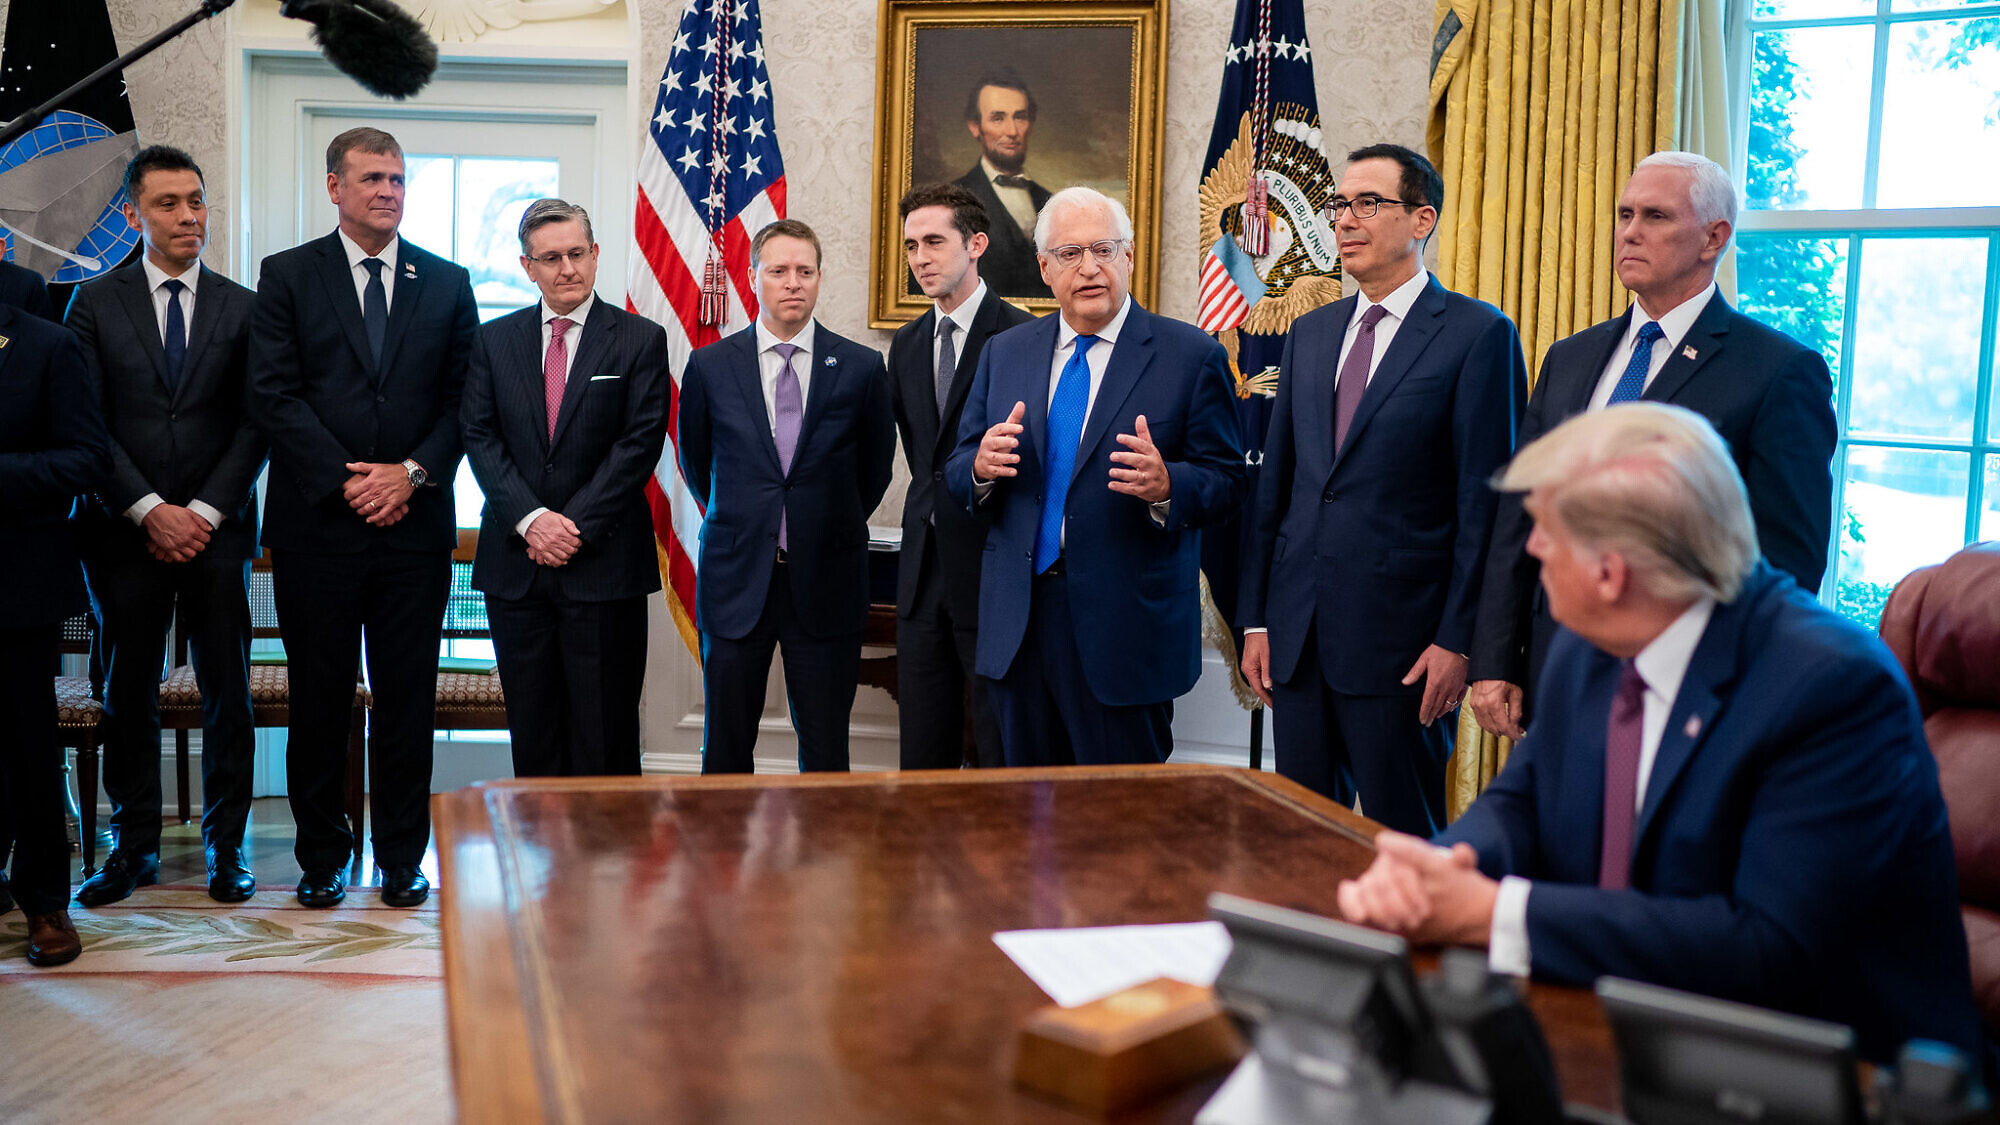 U.S. President Donald Trump listens as U.S. Ambassador to Israel David Friedman delivers remarks during the announcement of normalization of relations between Israel and Bahrain on Sept. 11, 2020, in the Oval Office of the White House. Credit: Tia Dufour/The White House.